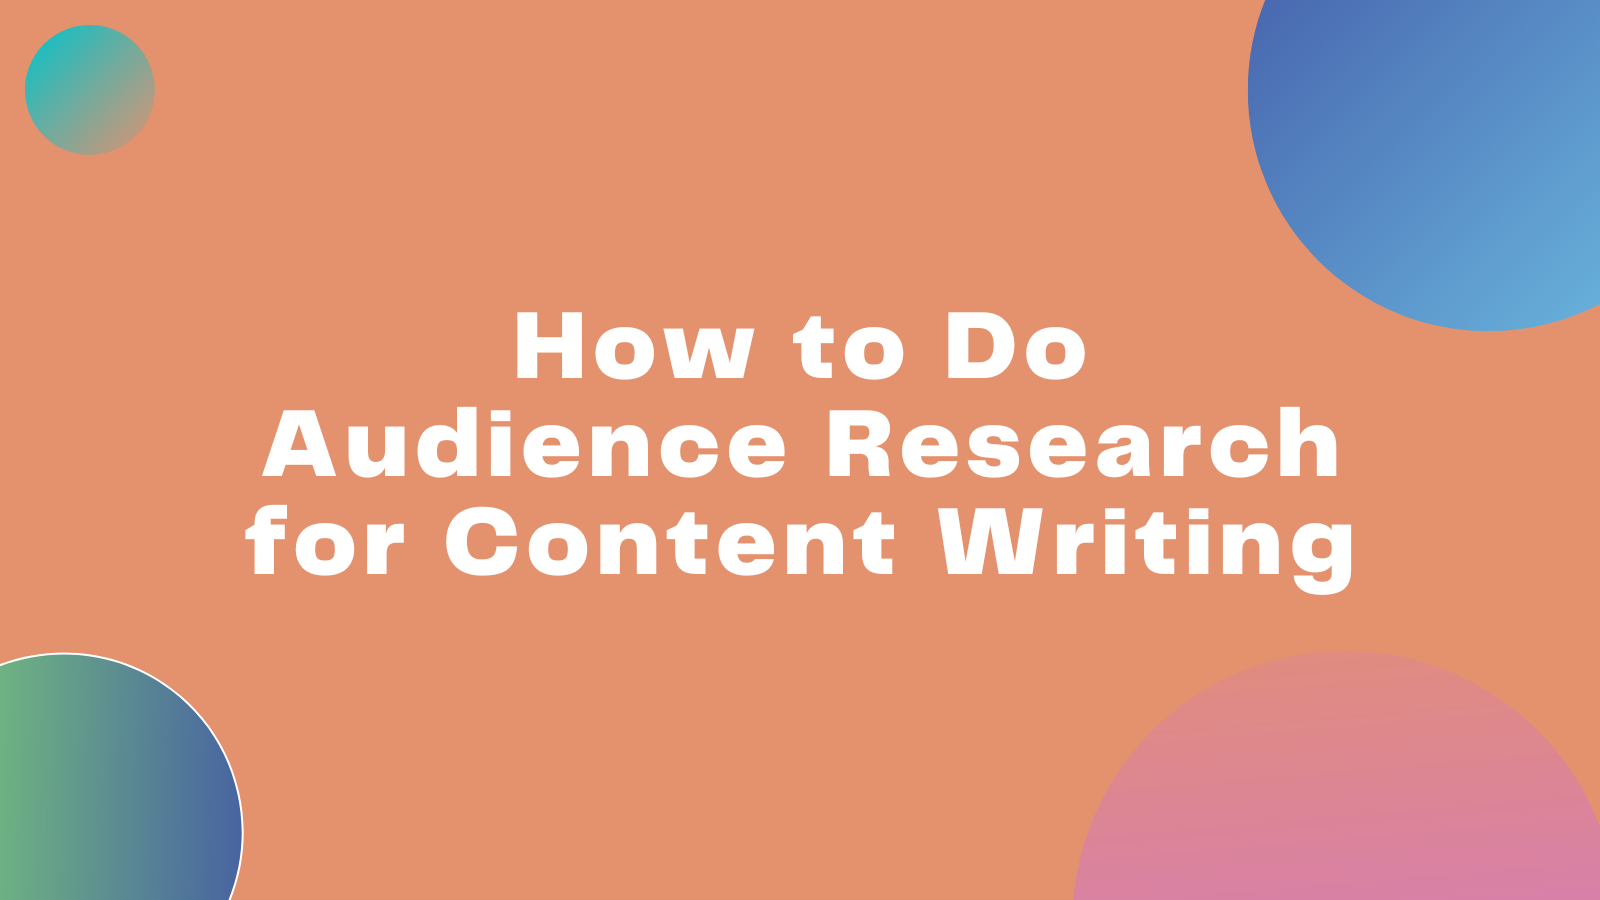 How to Do Audience Research for Content Writing